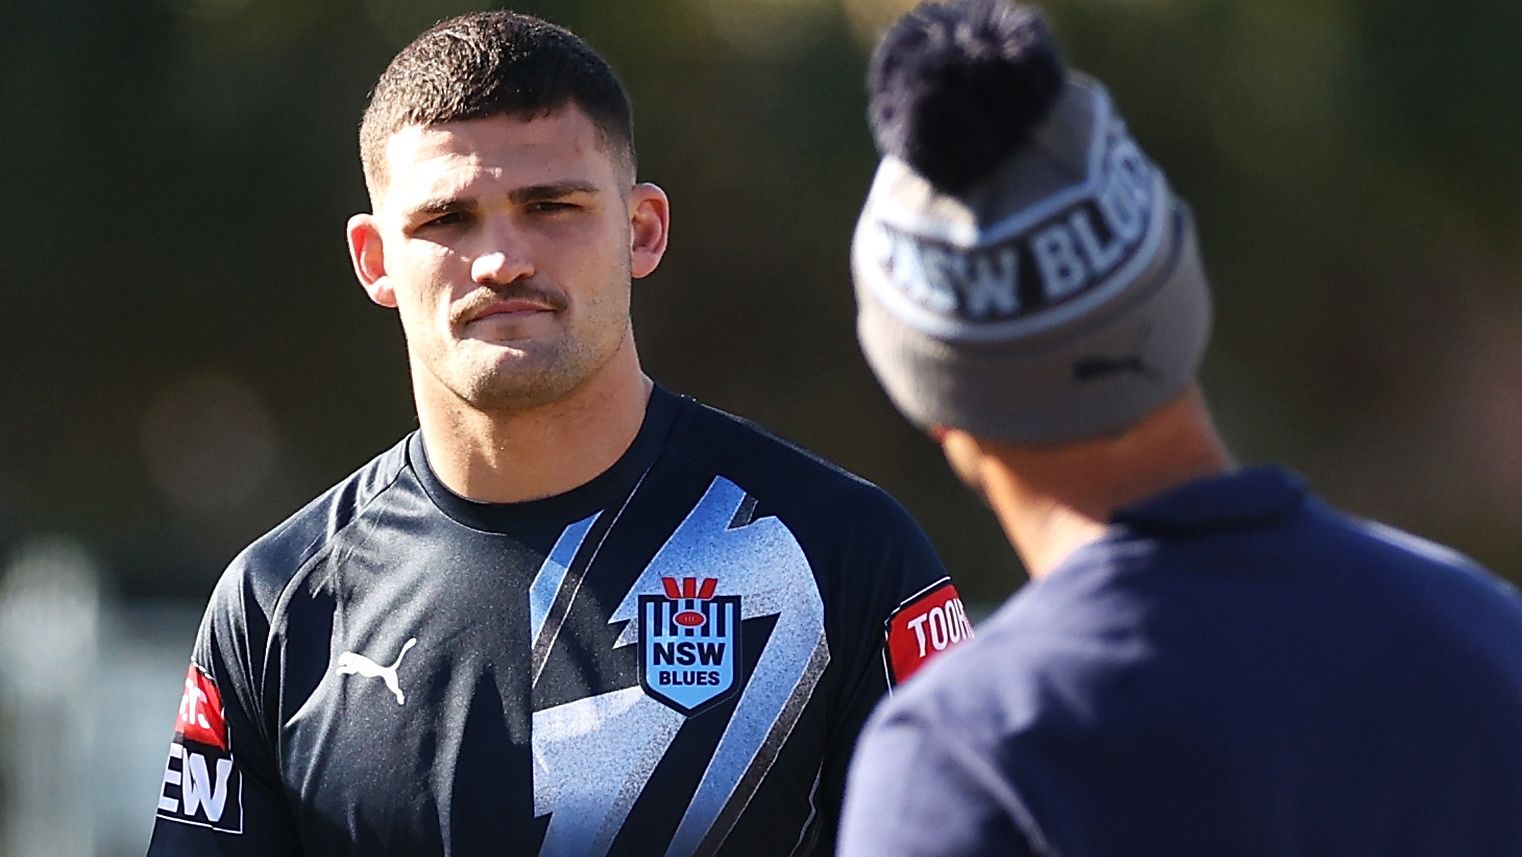 Nathan Cleary and his team mates listen on as Andrew Johns speaks during a New South Wales Blues State of Origin training session at Coogee Oval on May 23, 2023 in Sydney, Australia. (Photo by Mark Kolbe/Getty Images)